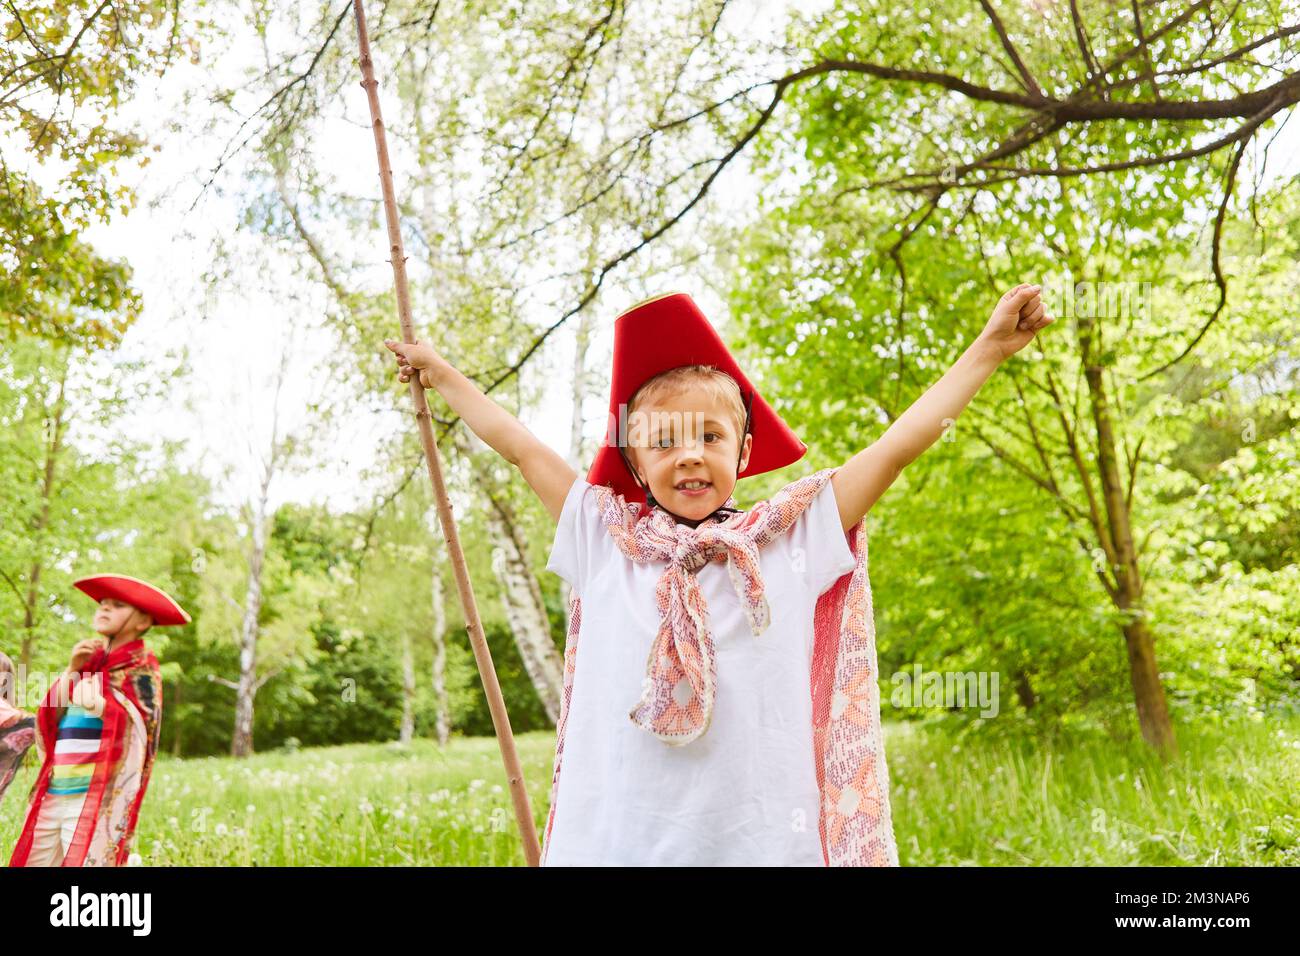 Portrait of smiling boy wearing tricorn hat with arms outstretched in green park Stock Photo